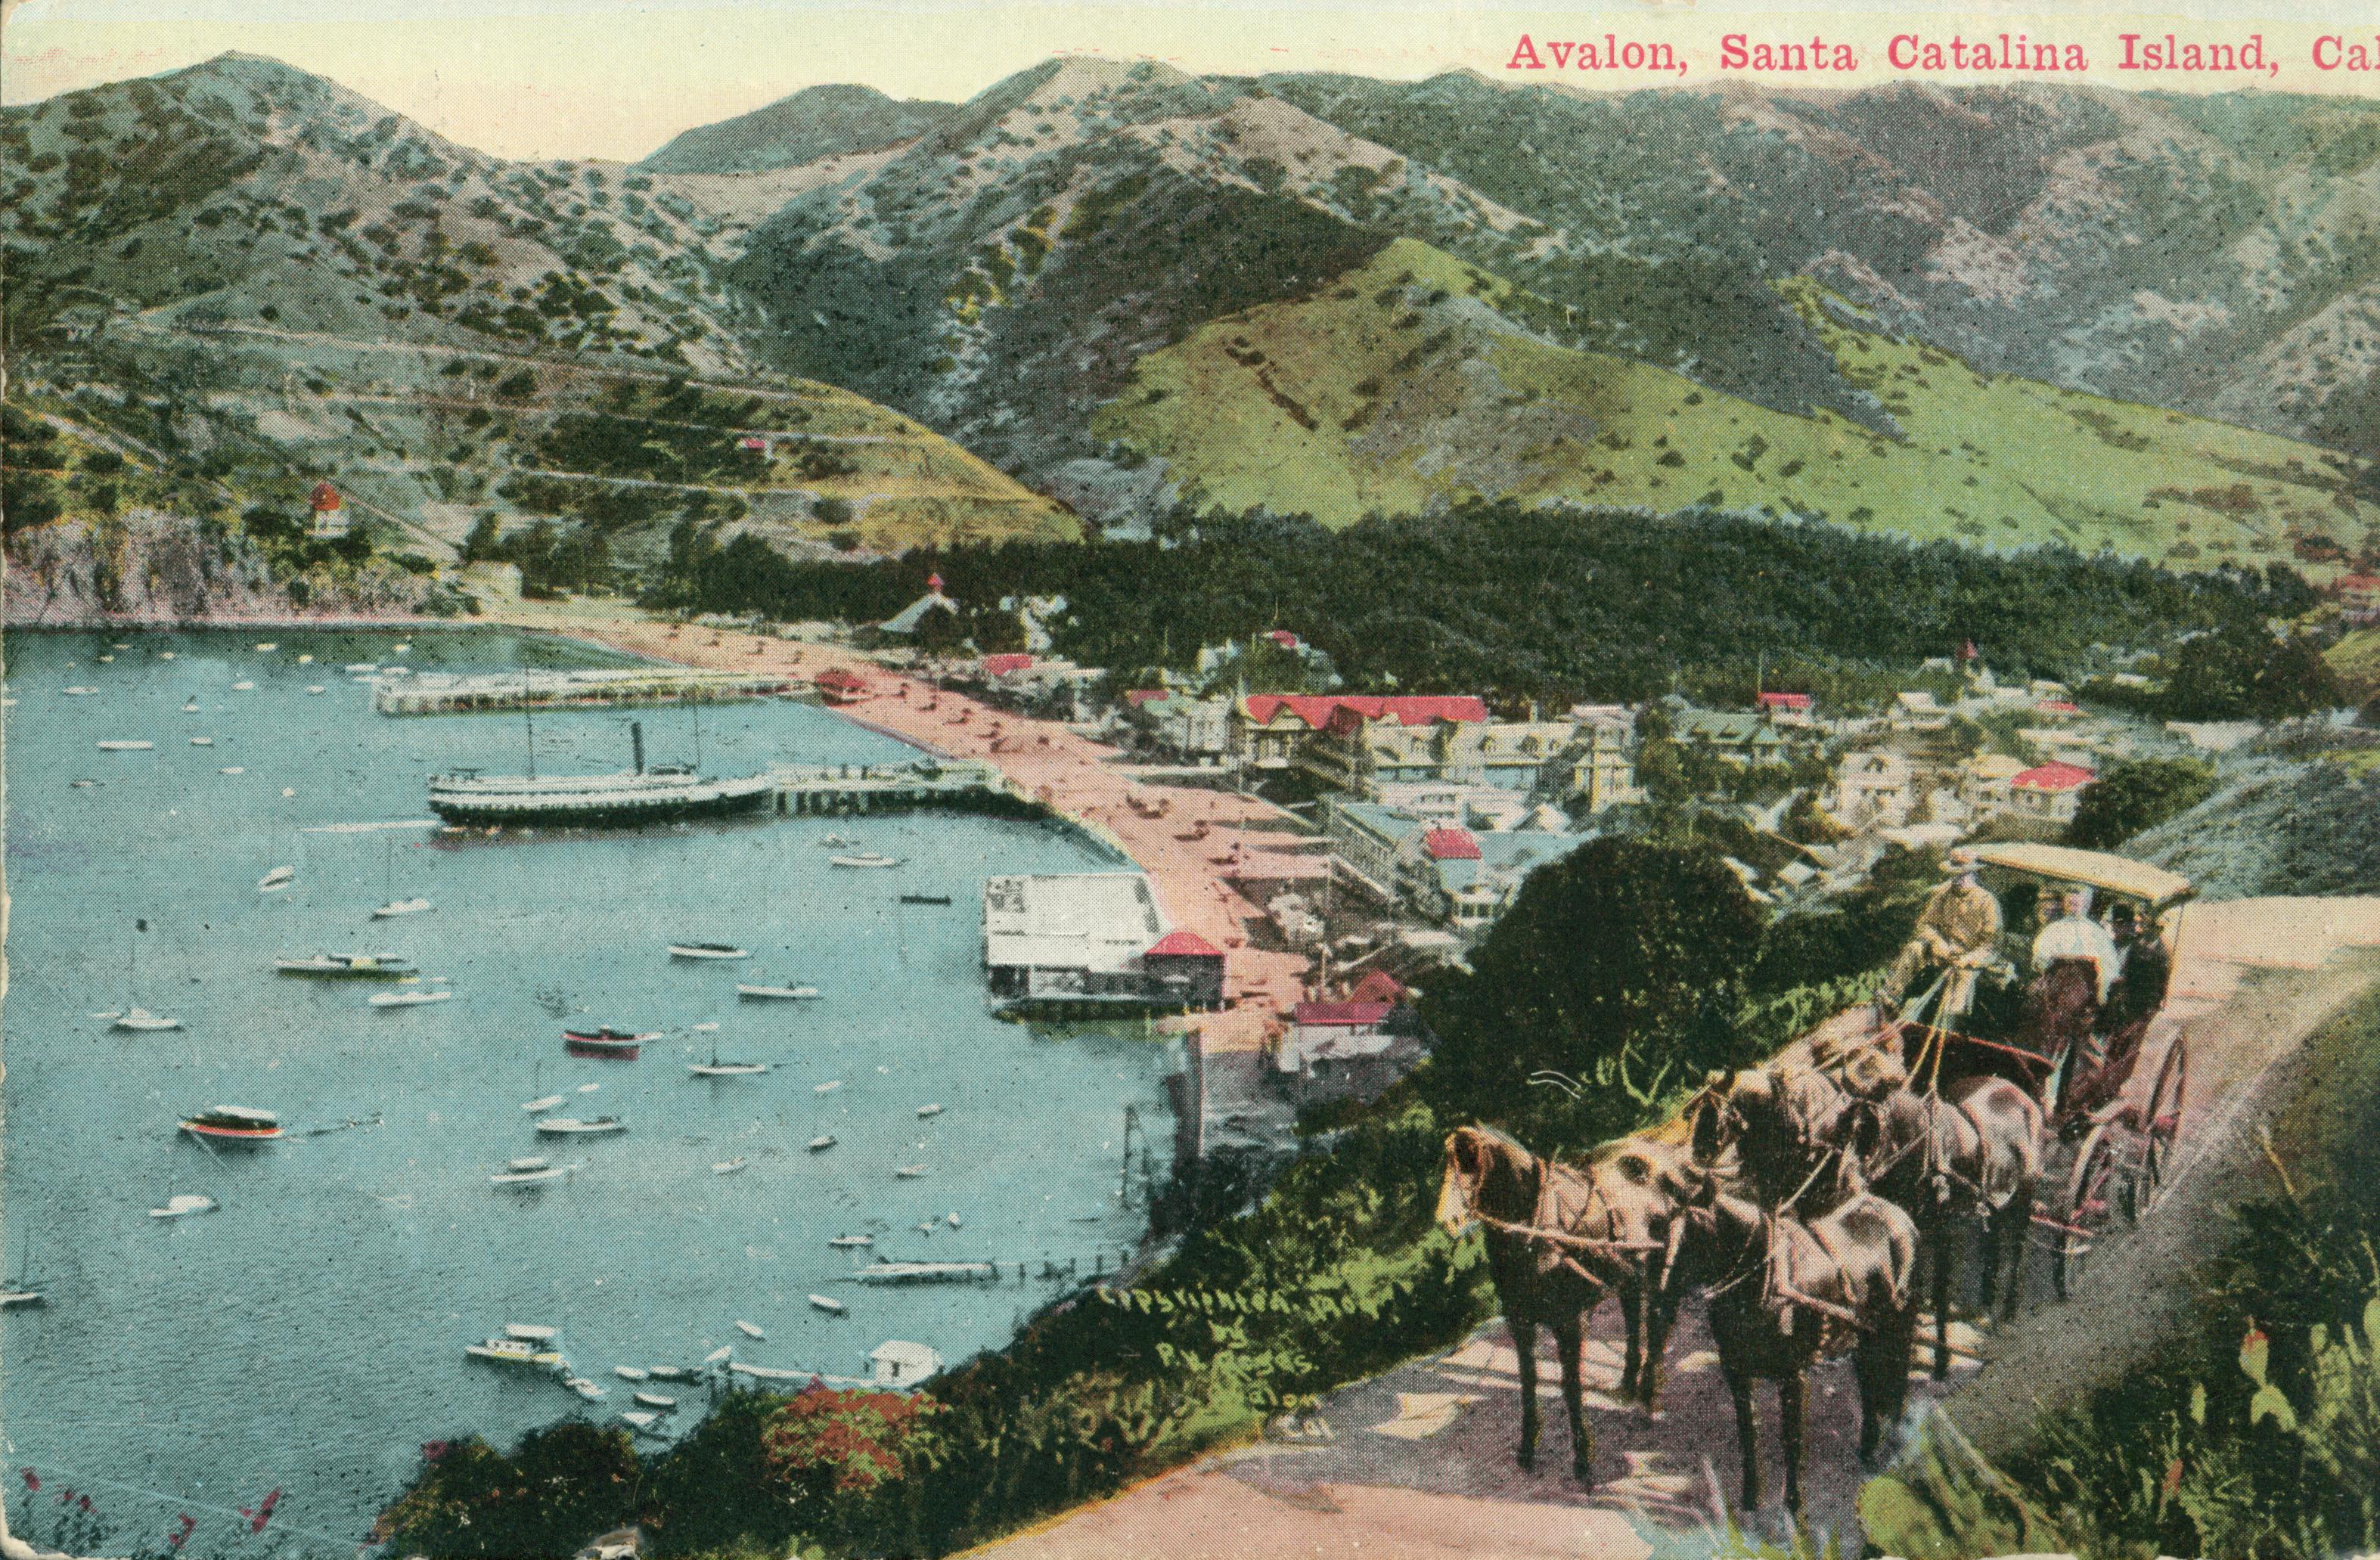 This postcard shows a horse-drawn carriage paused on a path overlooking the harbor on Catalina Island.